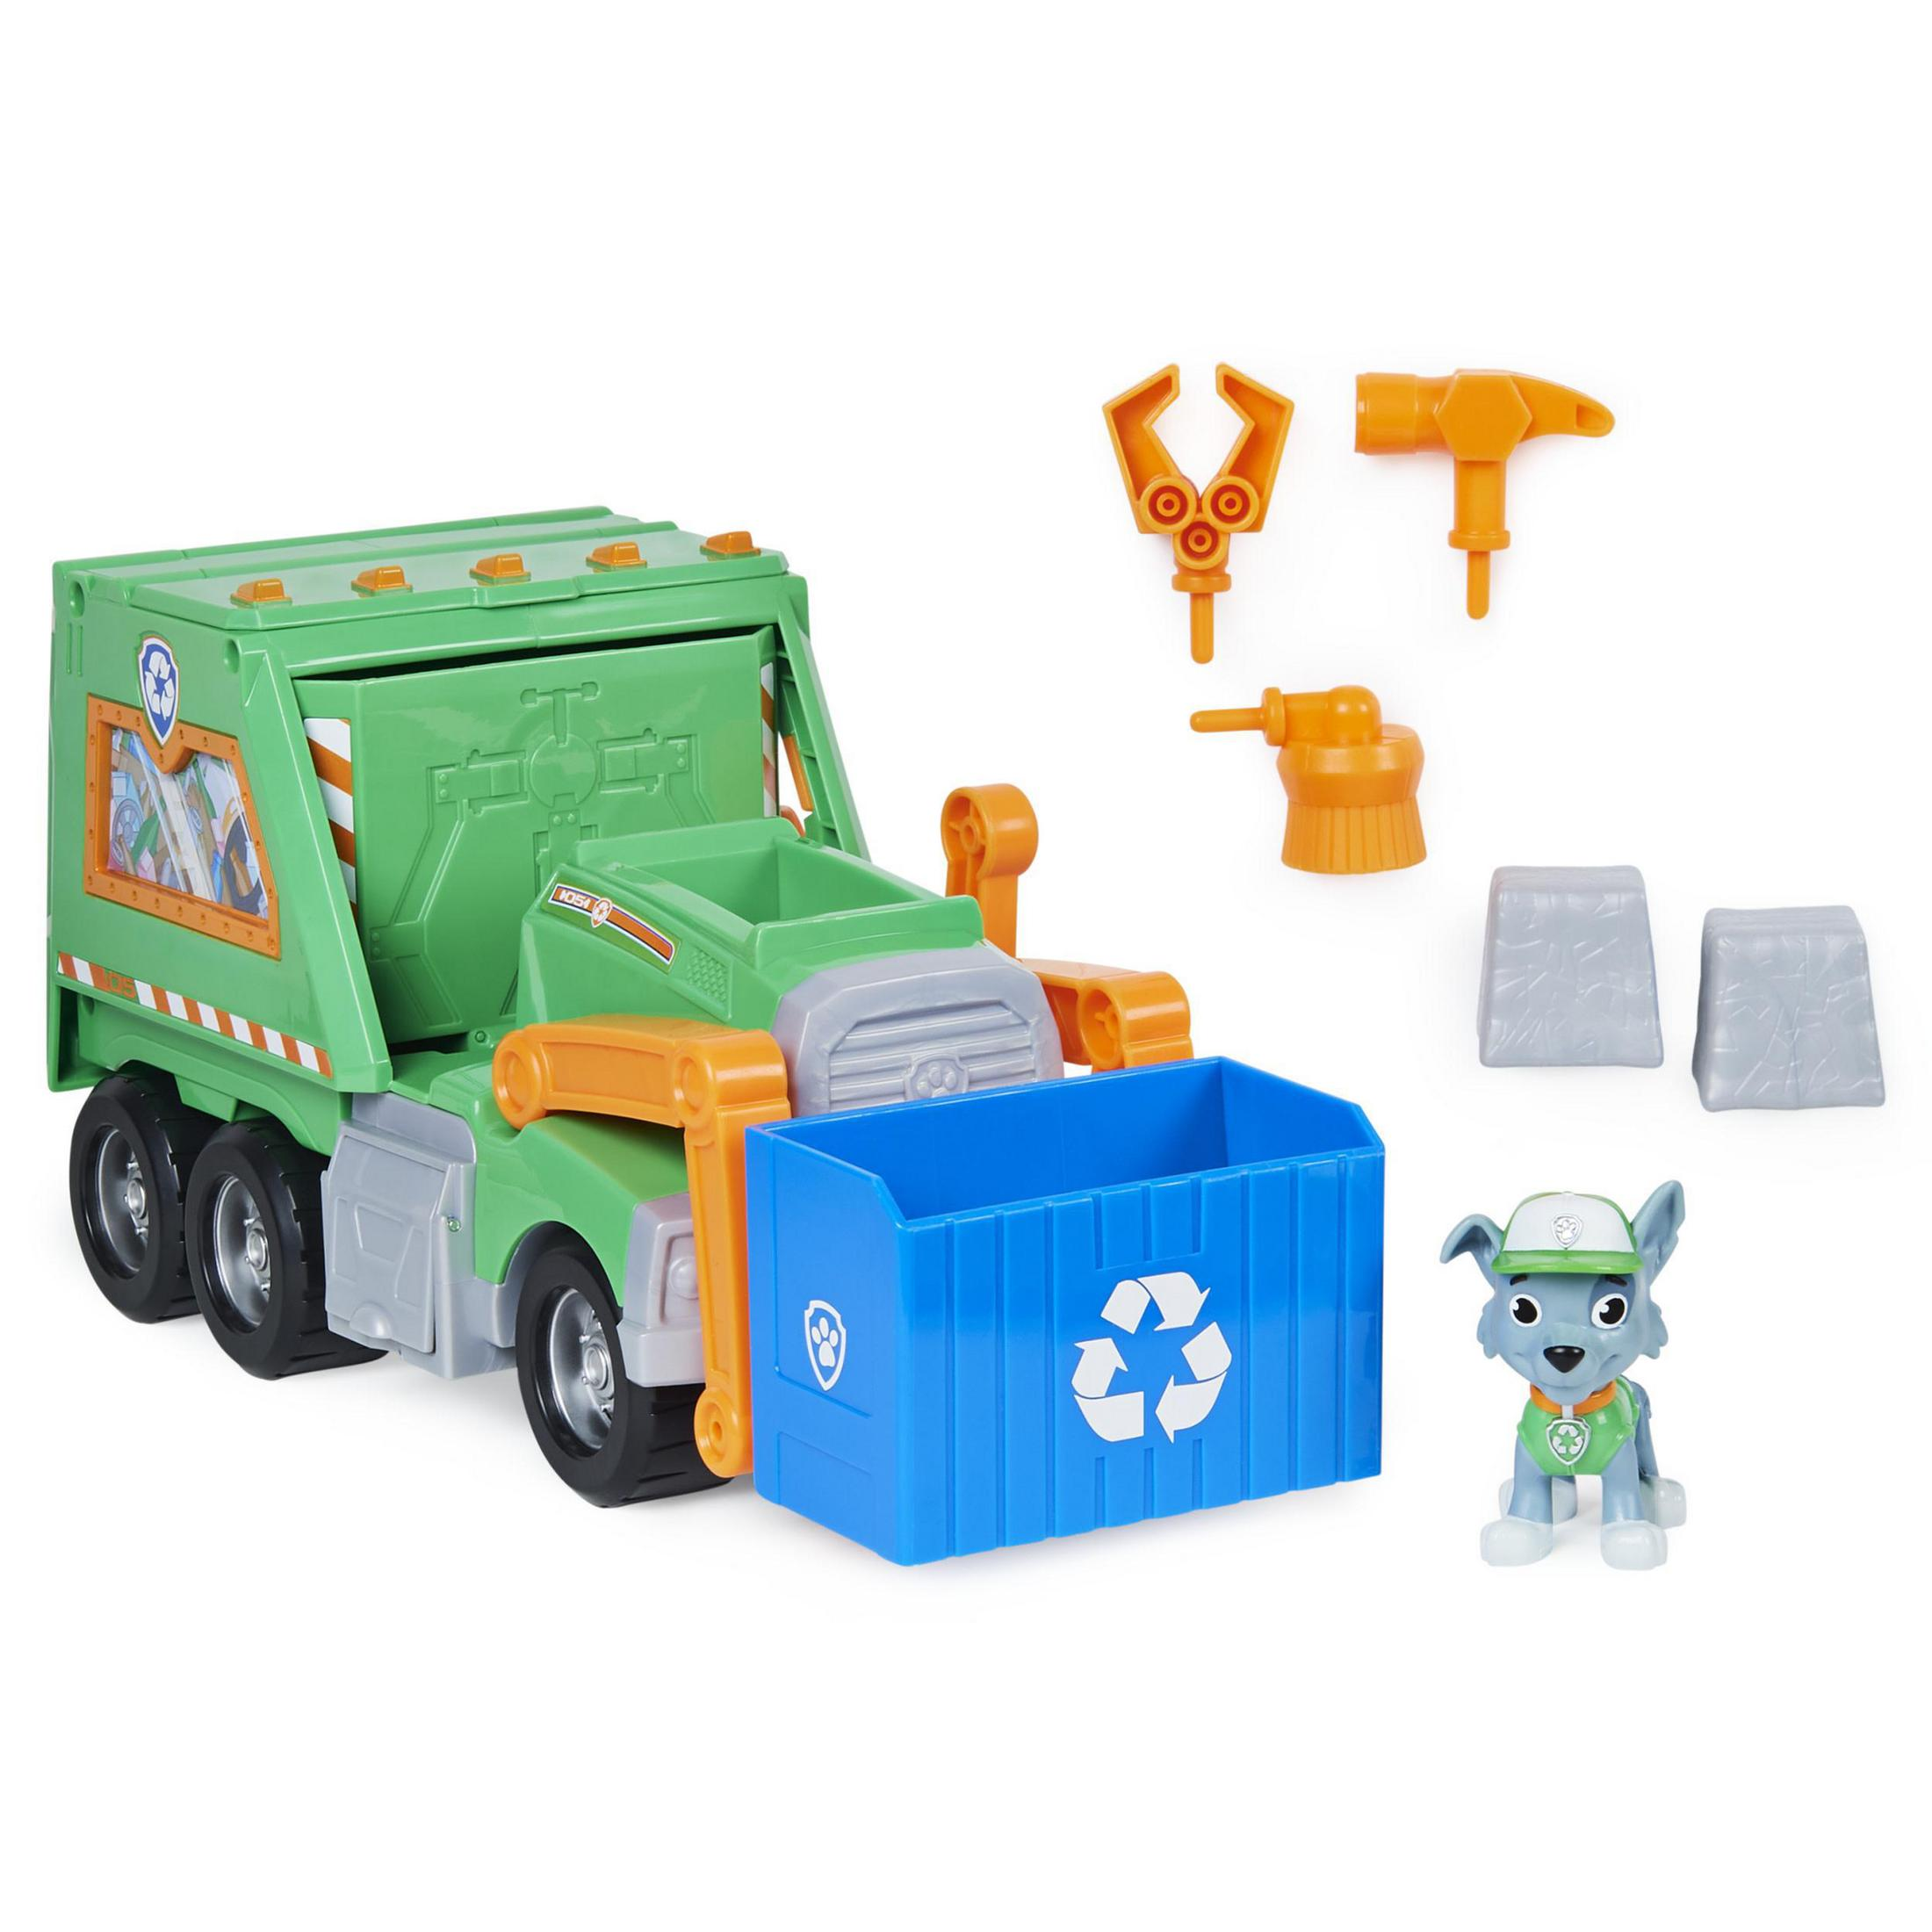 SPIN MASTER USE Spielset 36116 IT Mehrfarbig RE ROCKYS TRUCK PAW